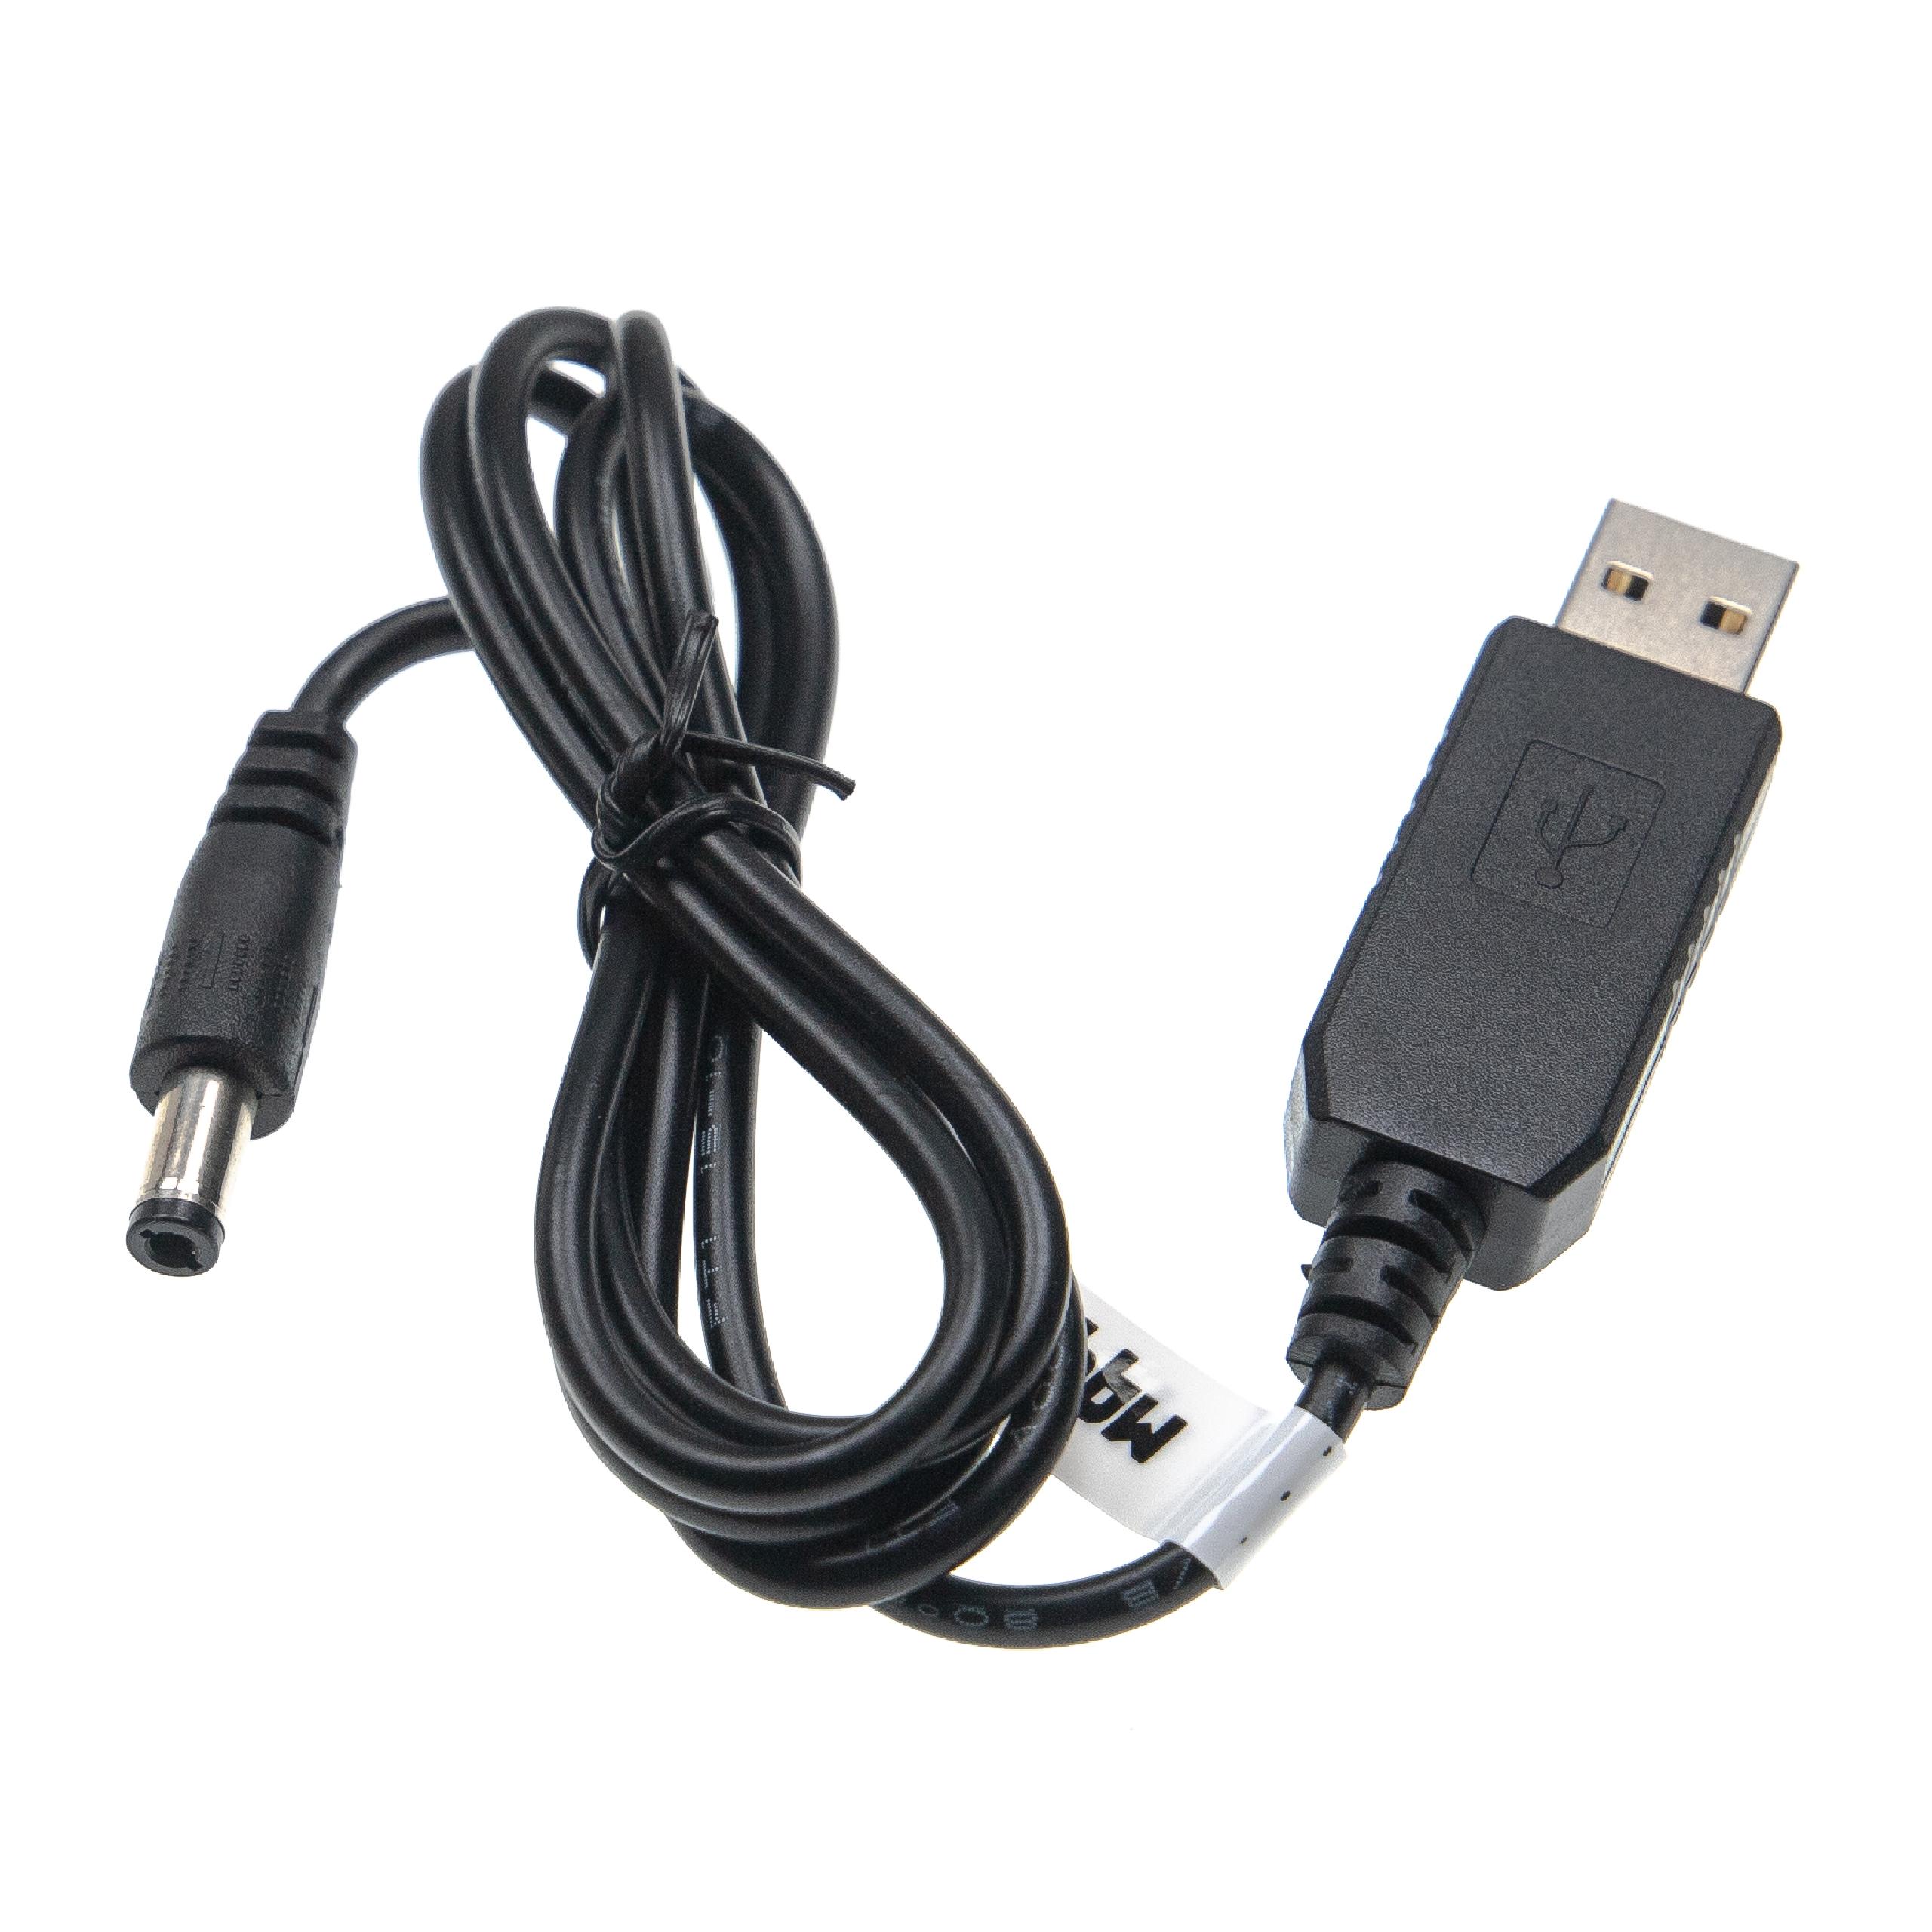 USB Charging Cable to 5.5 x 2.5 mm Barrel Connector - 5 V / 2 A to 9 V / 0.9 A 